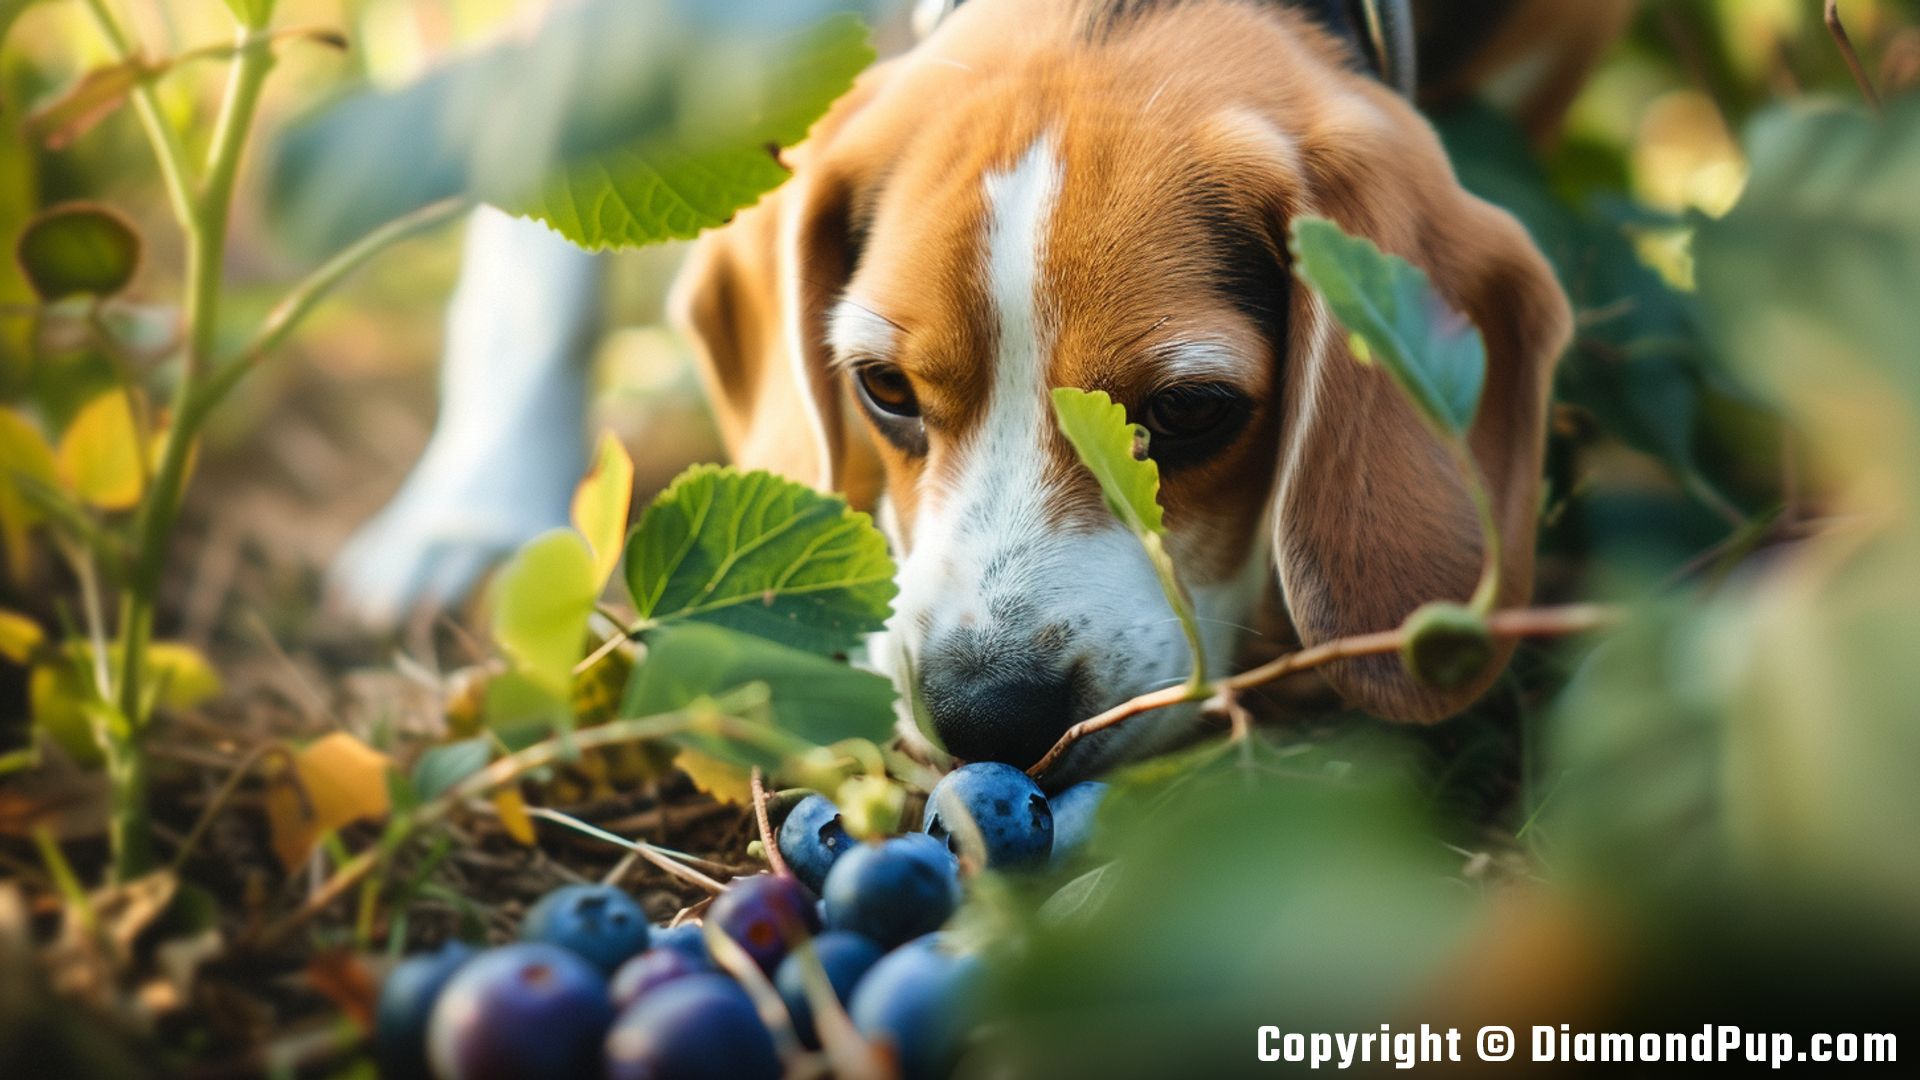 Photograph of Beagle Eating Blueberries